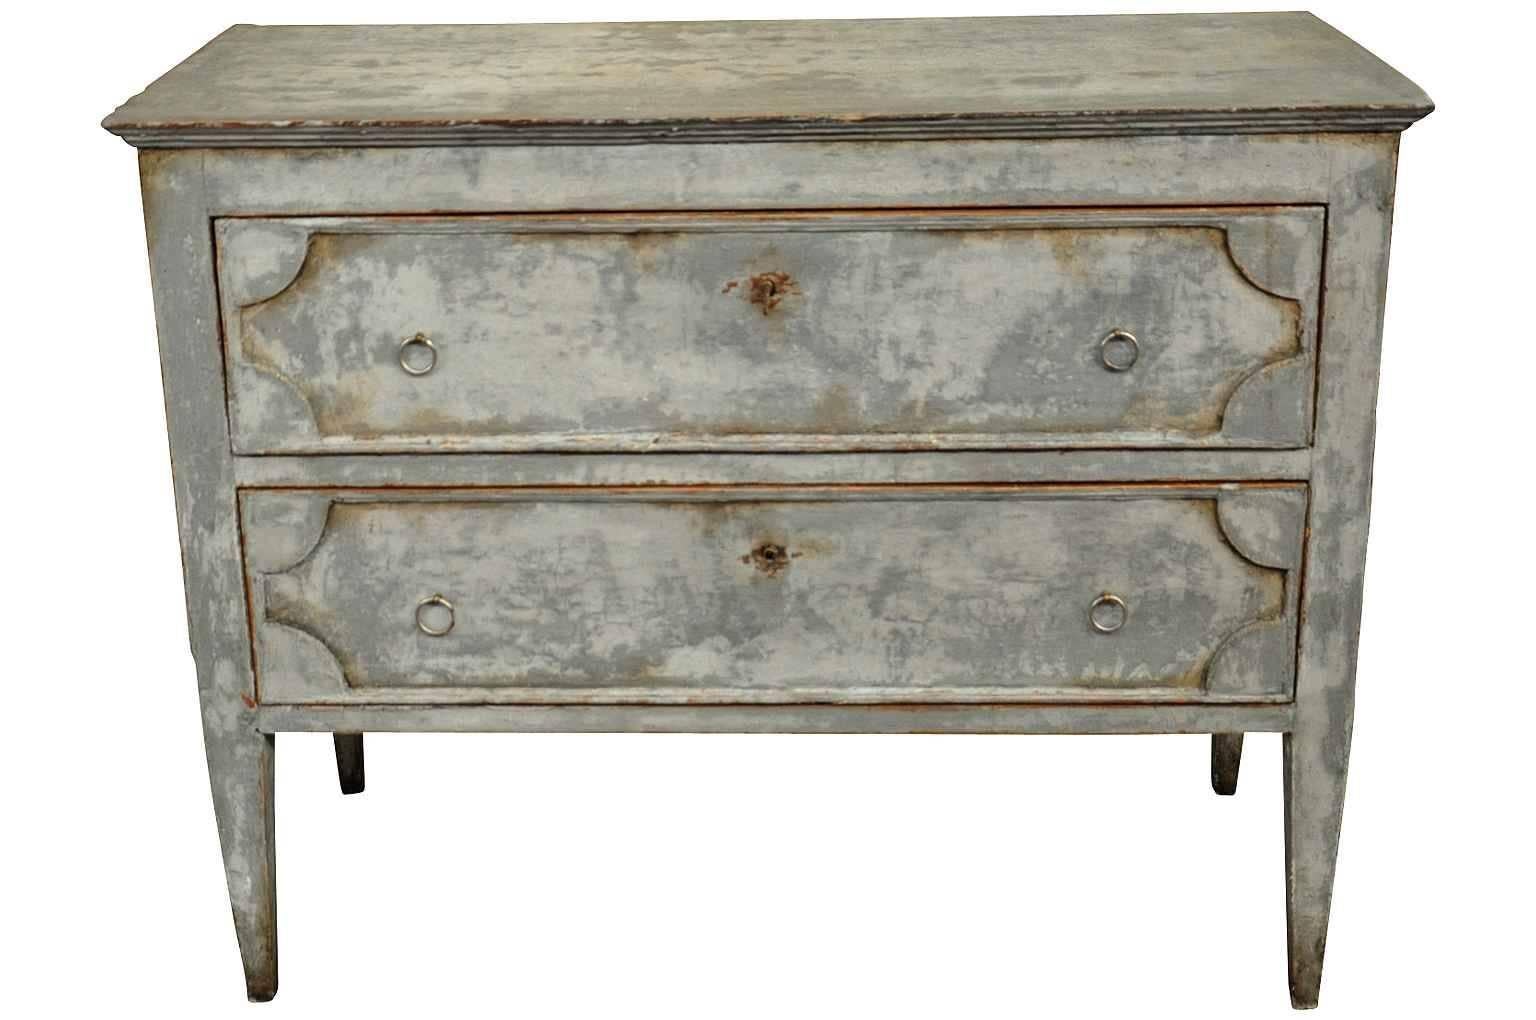 A very handsome later 19th century commode in painted wood. Terrific painted finish in a zinc-like tone. Beautifully constructed with a surface edge finish, molded panel drawer fronts and sides, and nicely tapered legs. Wonderful as a bedside table